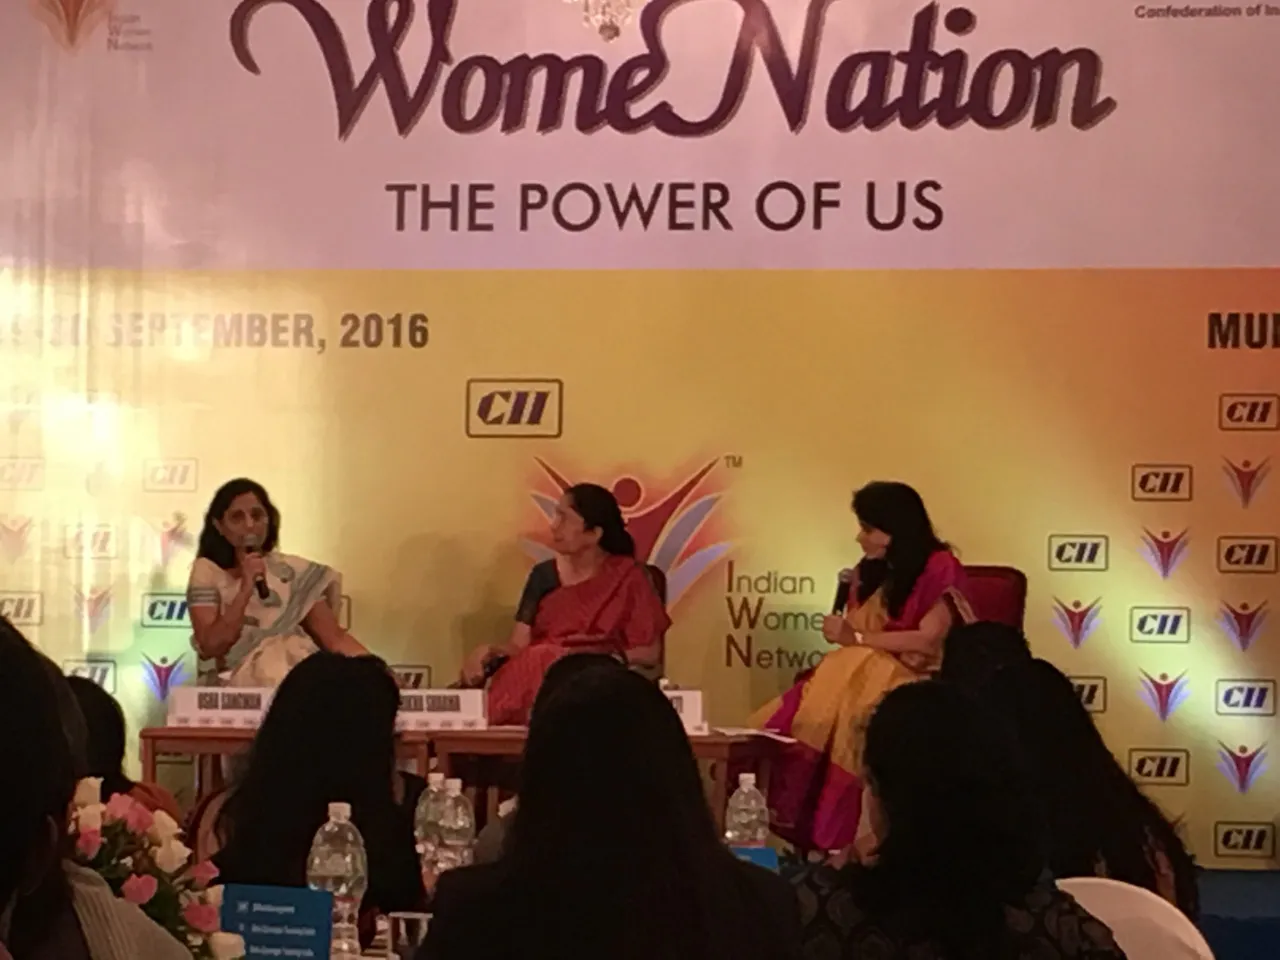 Be the heroine not the victim - hear it from India's top women leaders